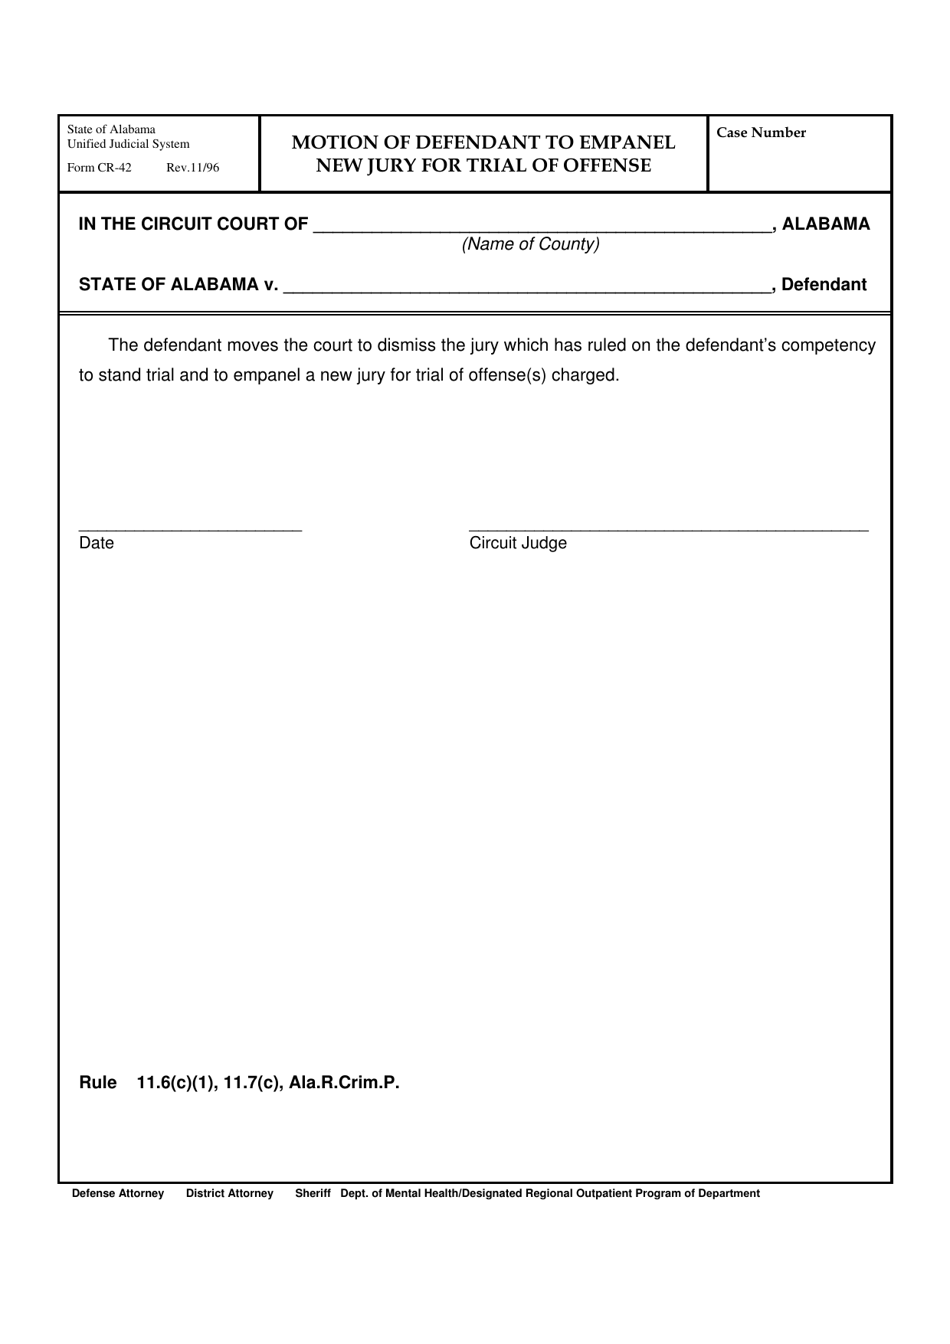 Form CR-42 Motion of Defendant to Empanel New Jury for Trial of Offense - Alabama, Page 1